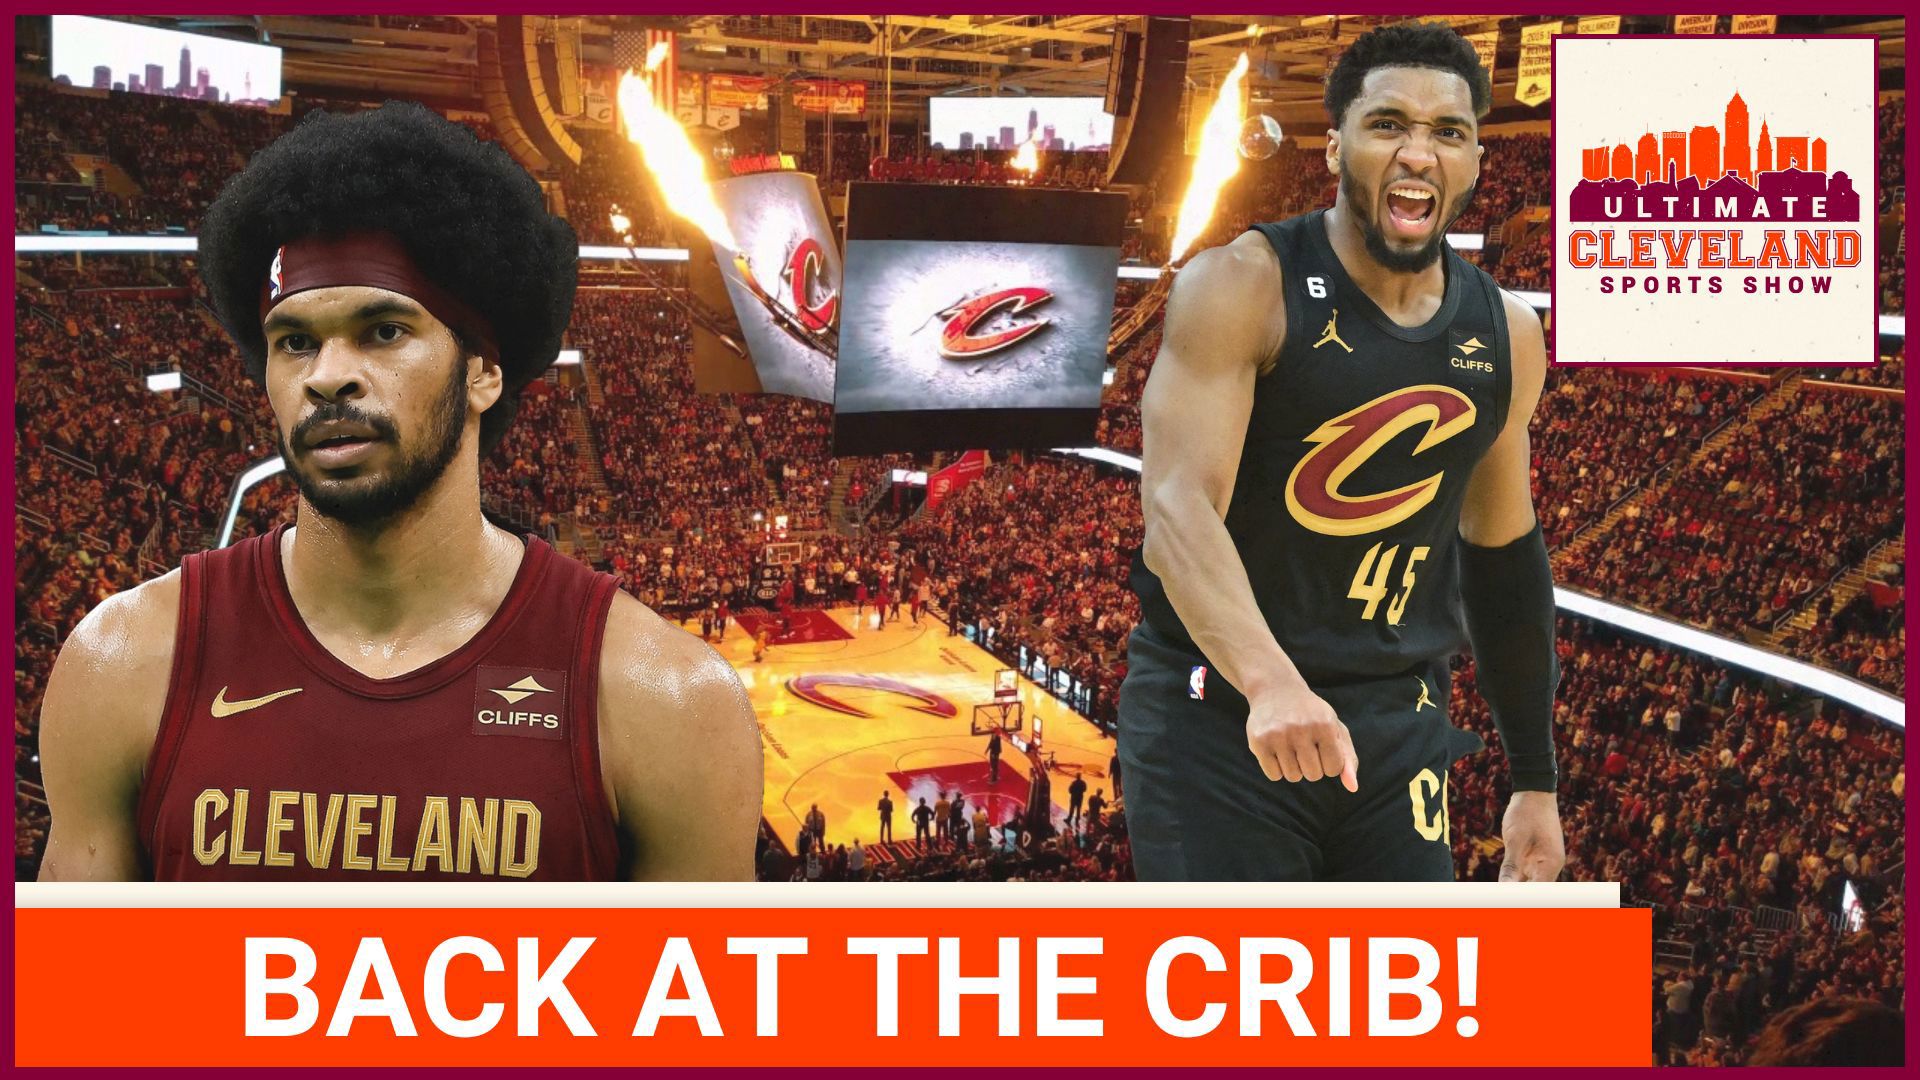 If the Cavaliers don't get off to a fast start, the hometown crowd will waste no time letting them hear it